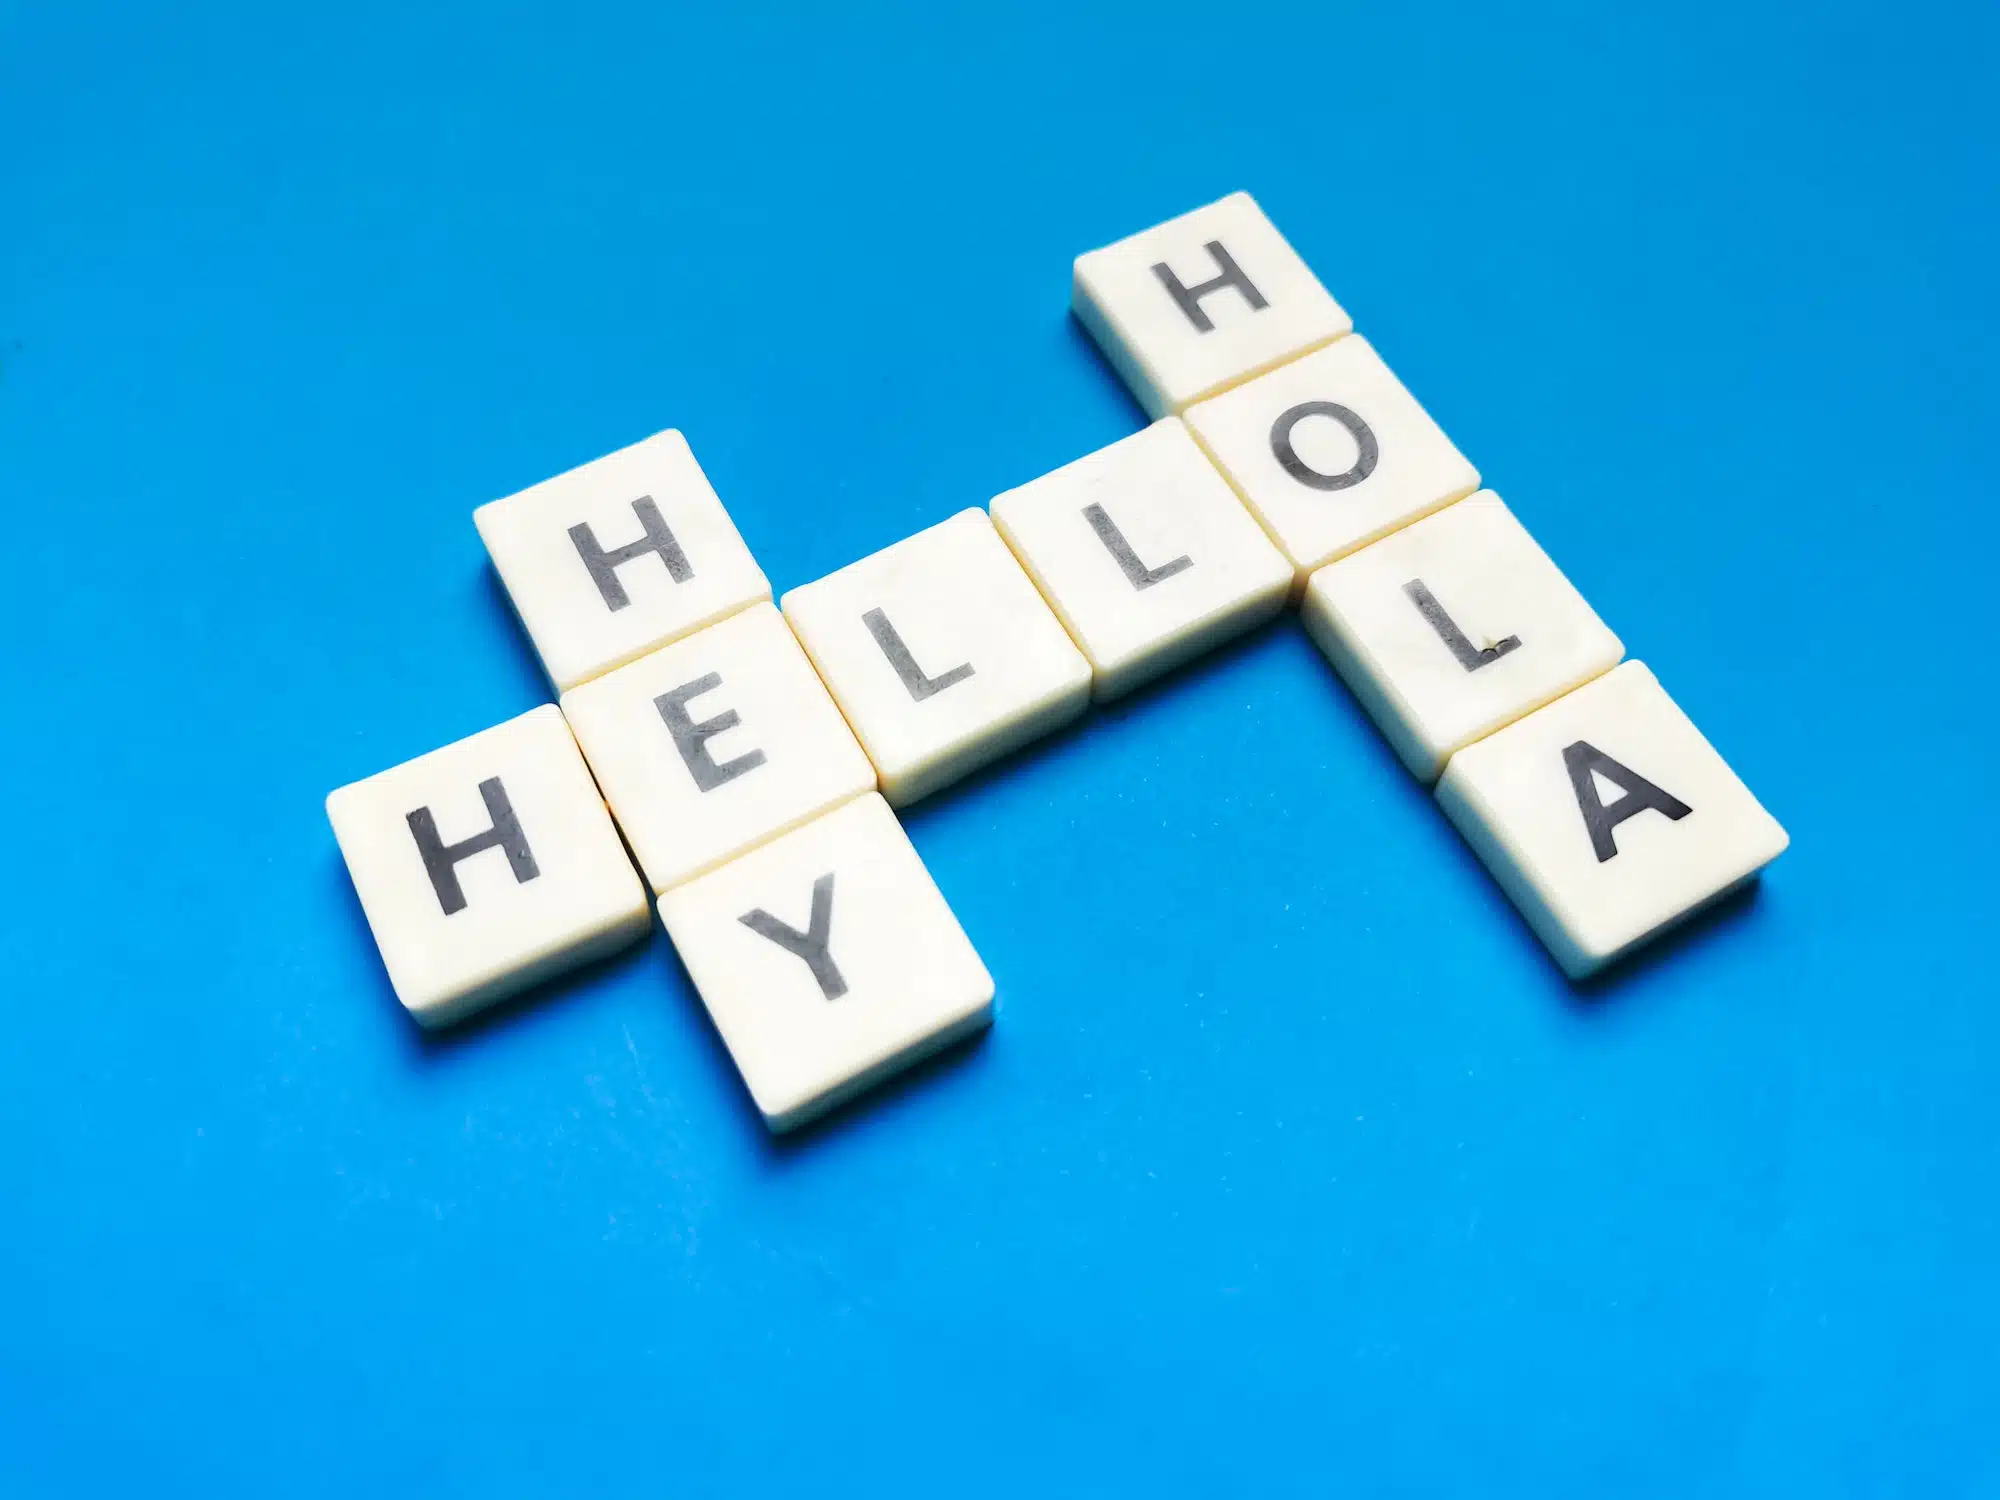 Hey Hola Hello made of square letter tiles against blue background.